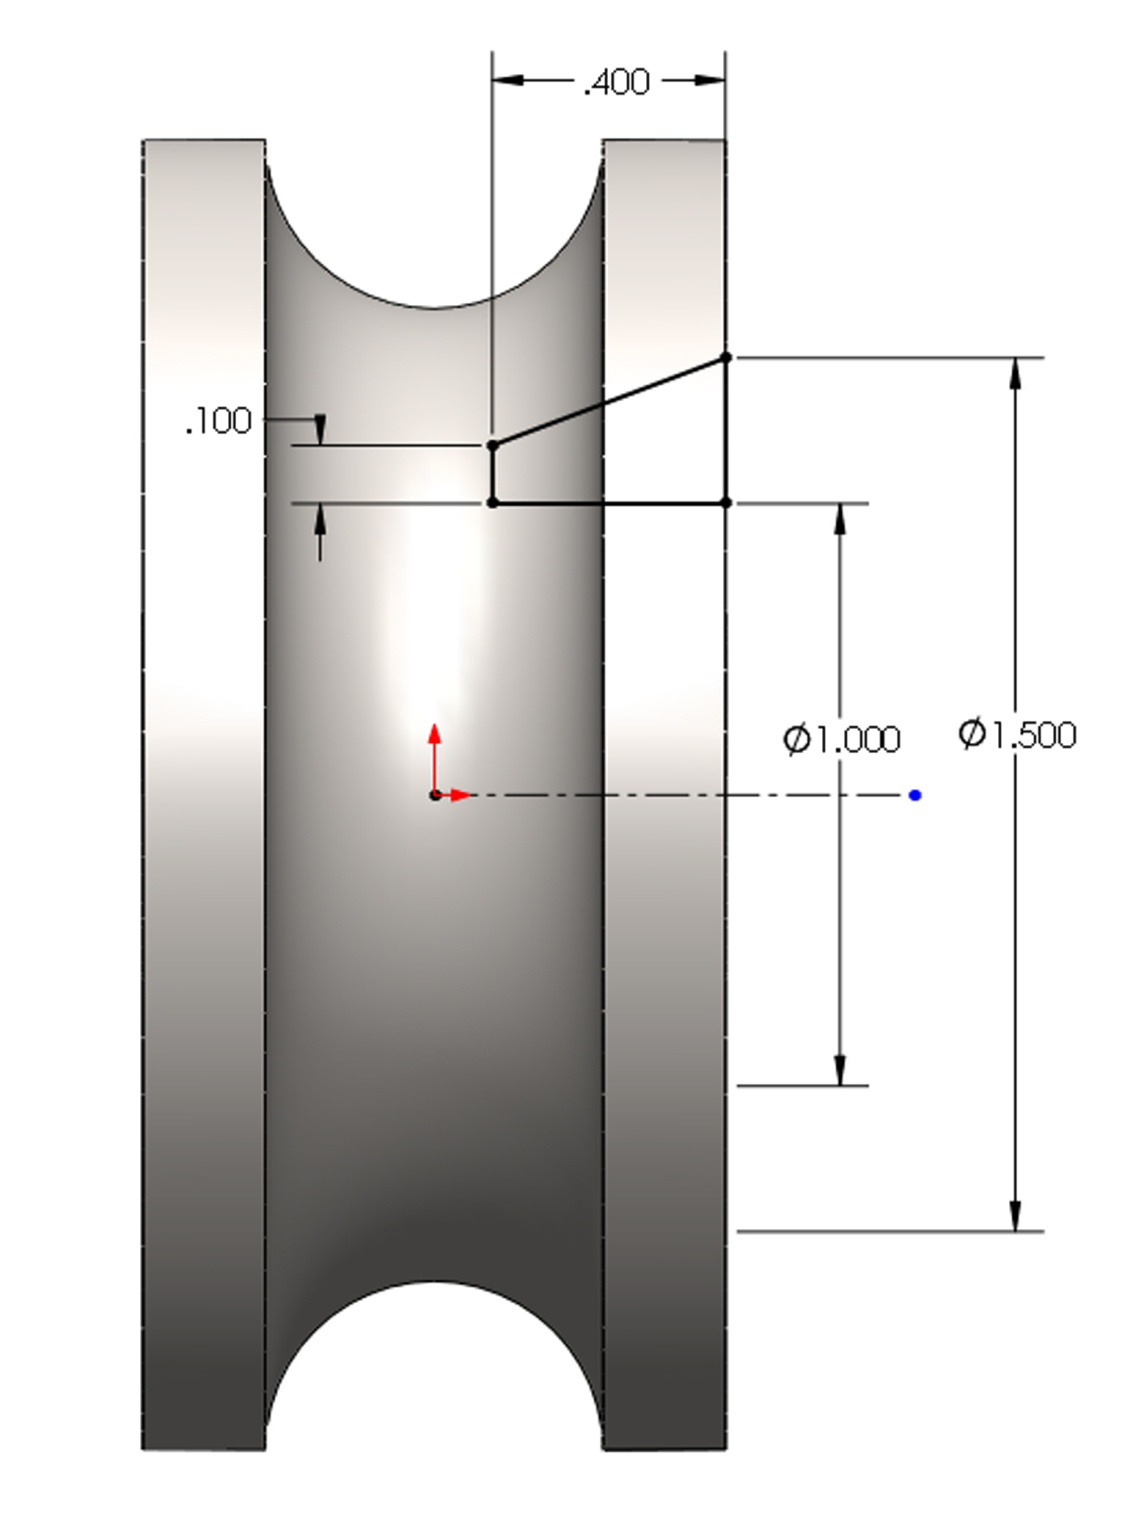 Part with dimensions